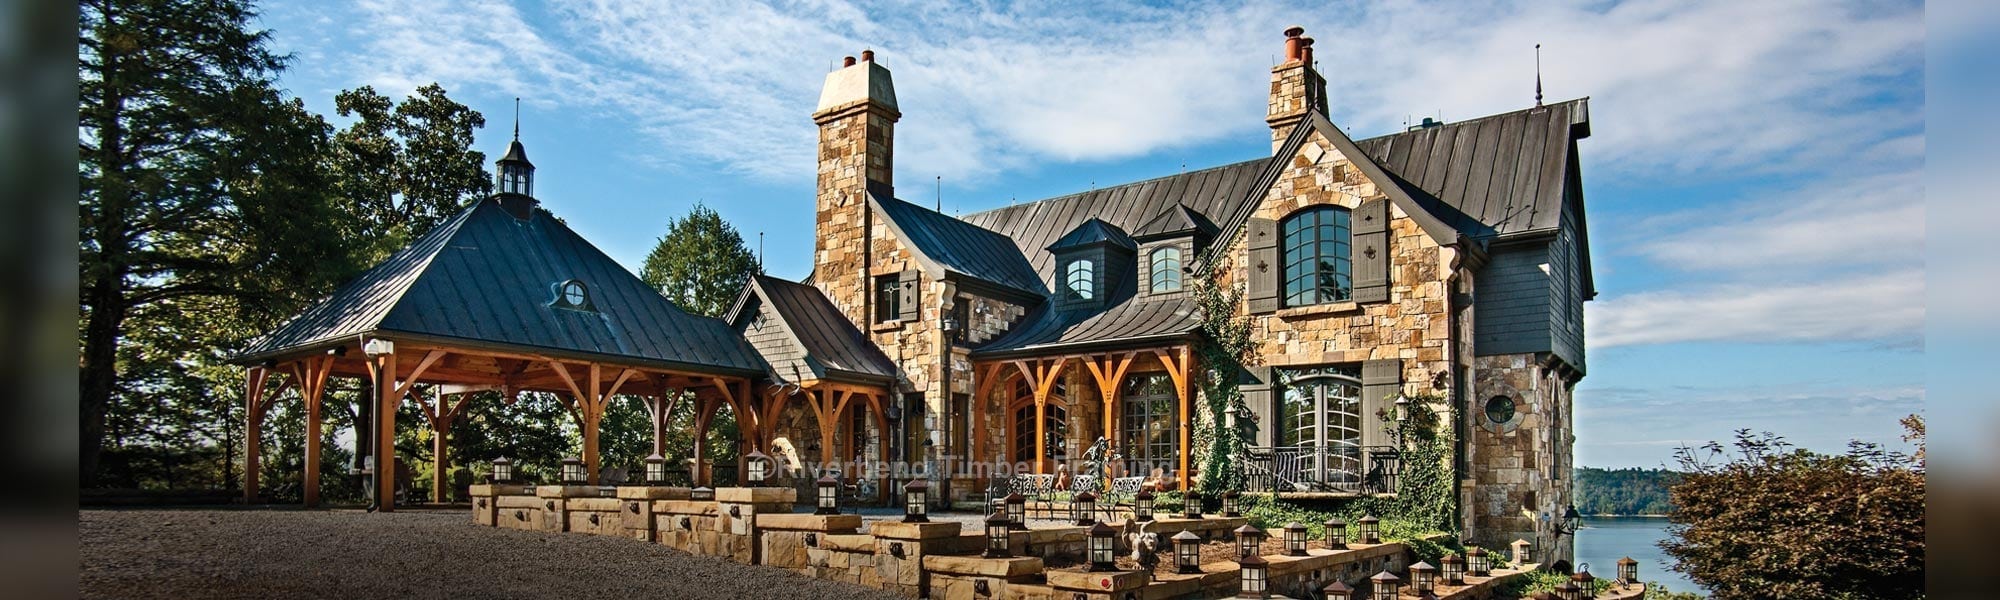 timber frame home with multi colored tan stone exterior with outdoor timber frame area with a lake in the background